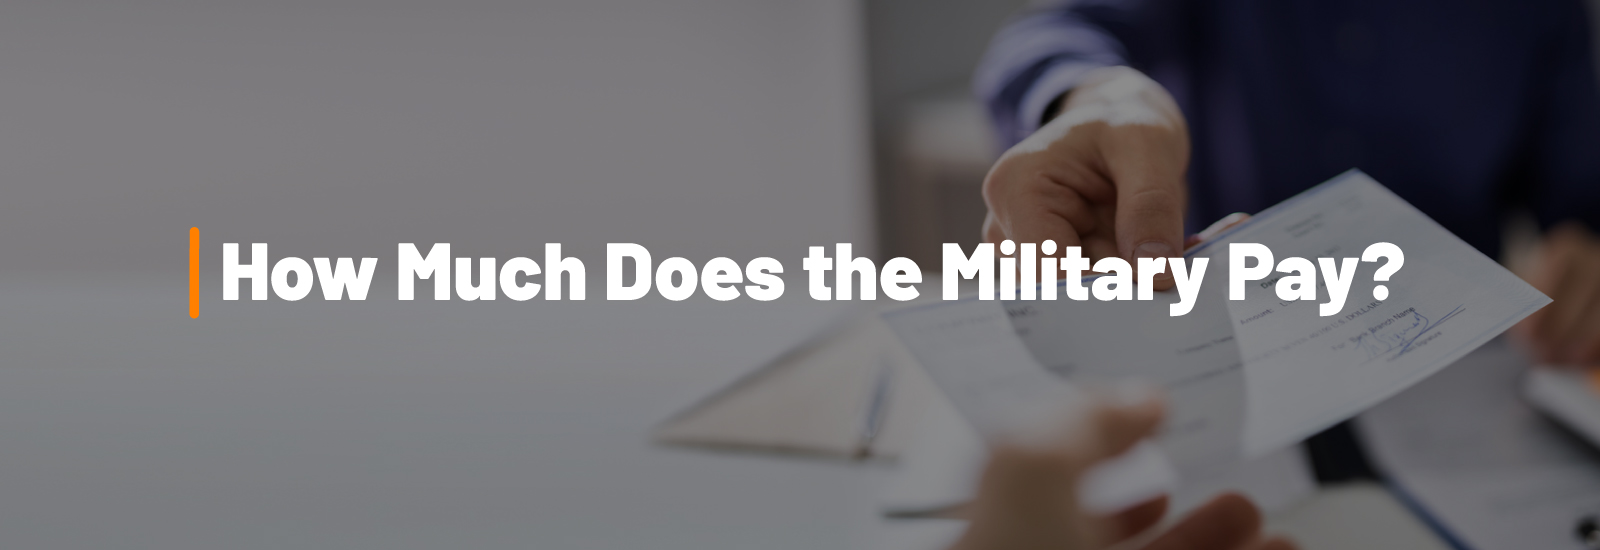 How Much Does the Military Pay?